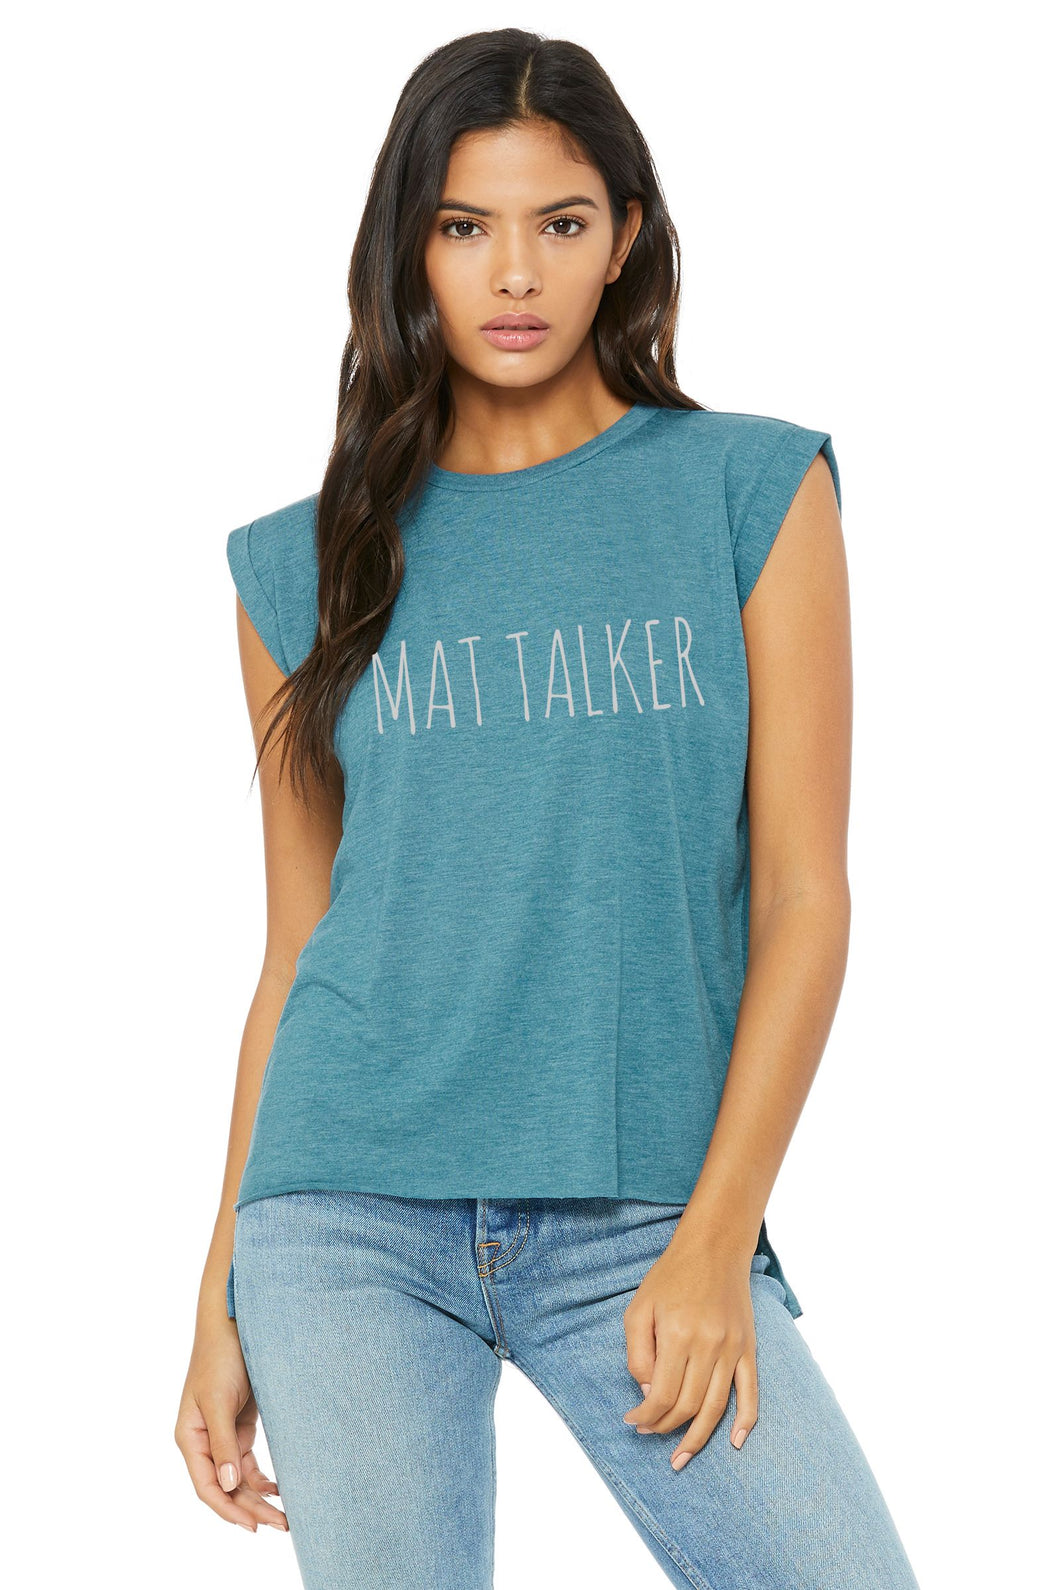 Mat Talker Cheer Flowy Muscle T-Shirt with Rolled Cuff